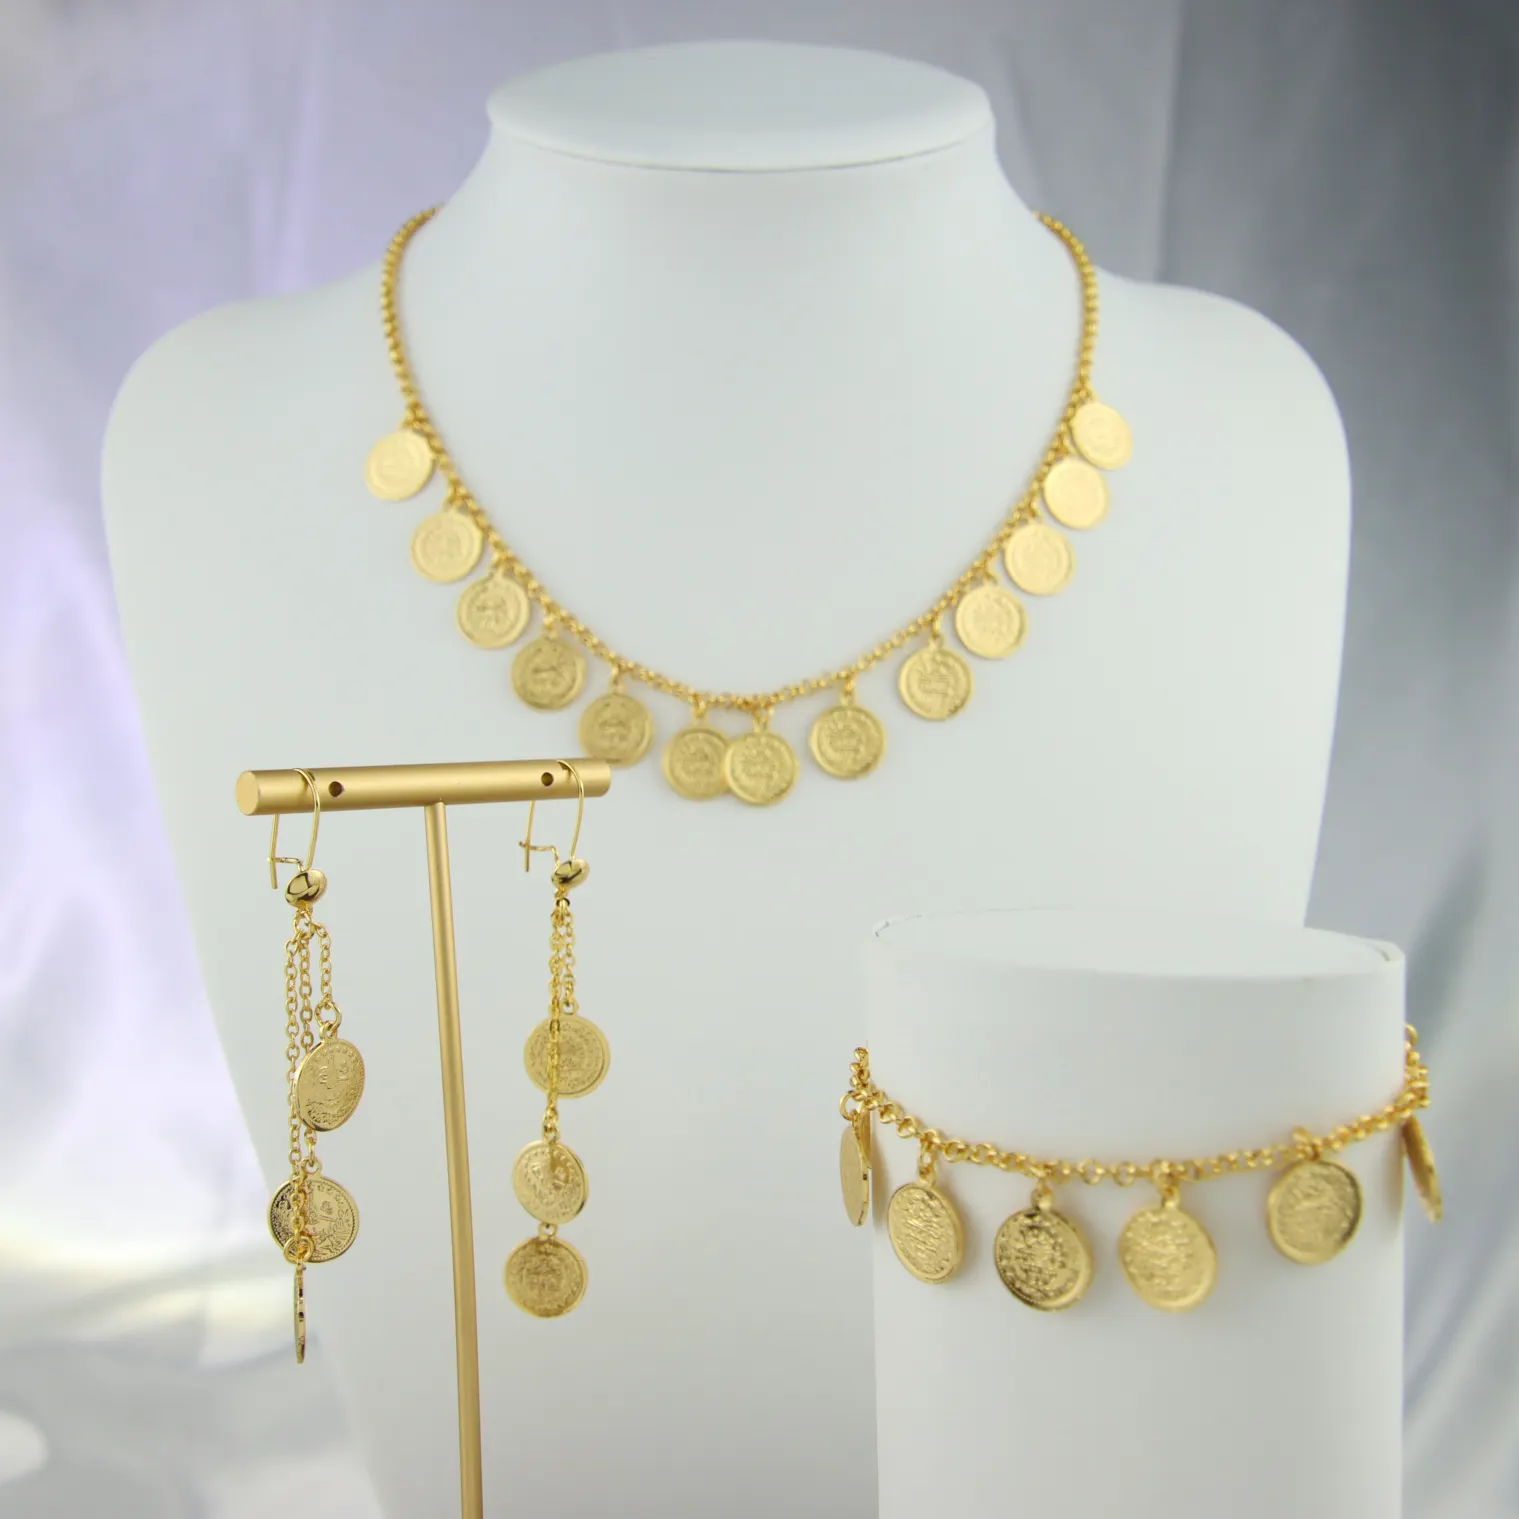 High Quality Fashion Jewelry Sets Coin Jewelry Necklace Brazilian Jewelry Set 18k Gold Plated